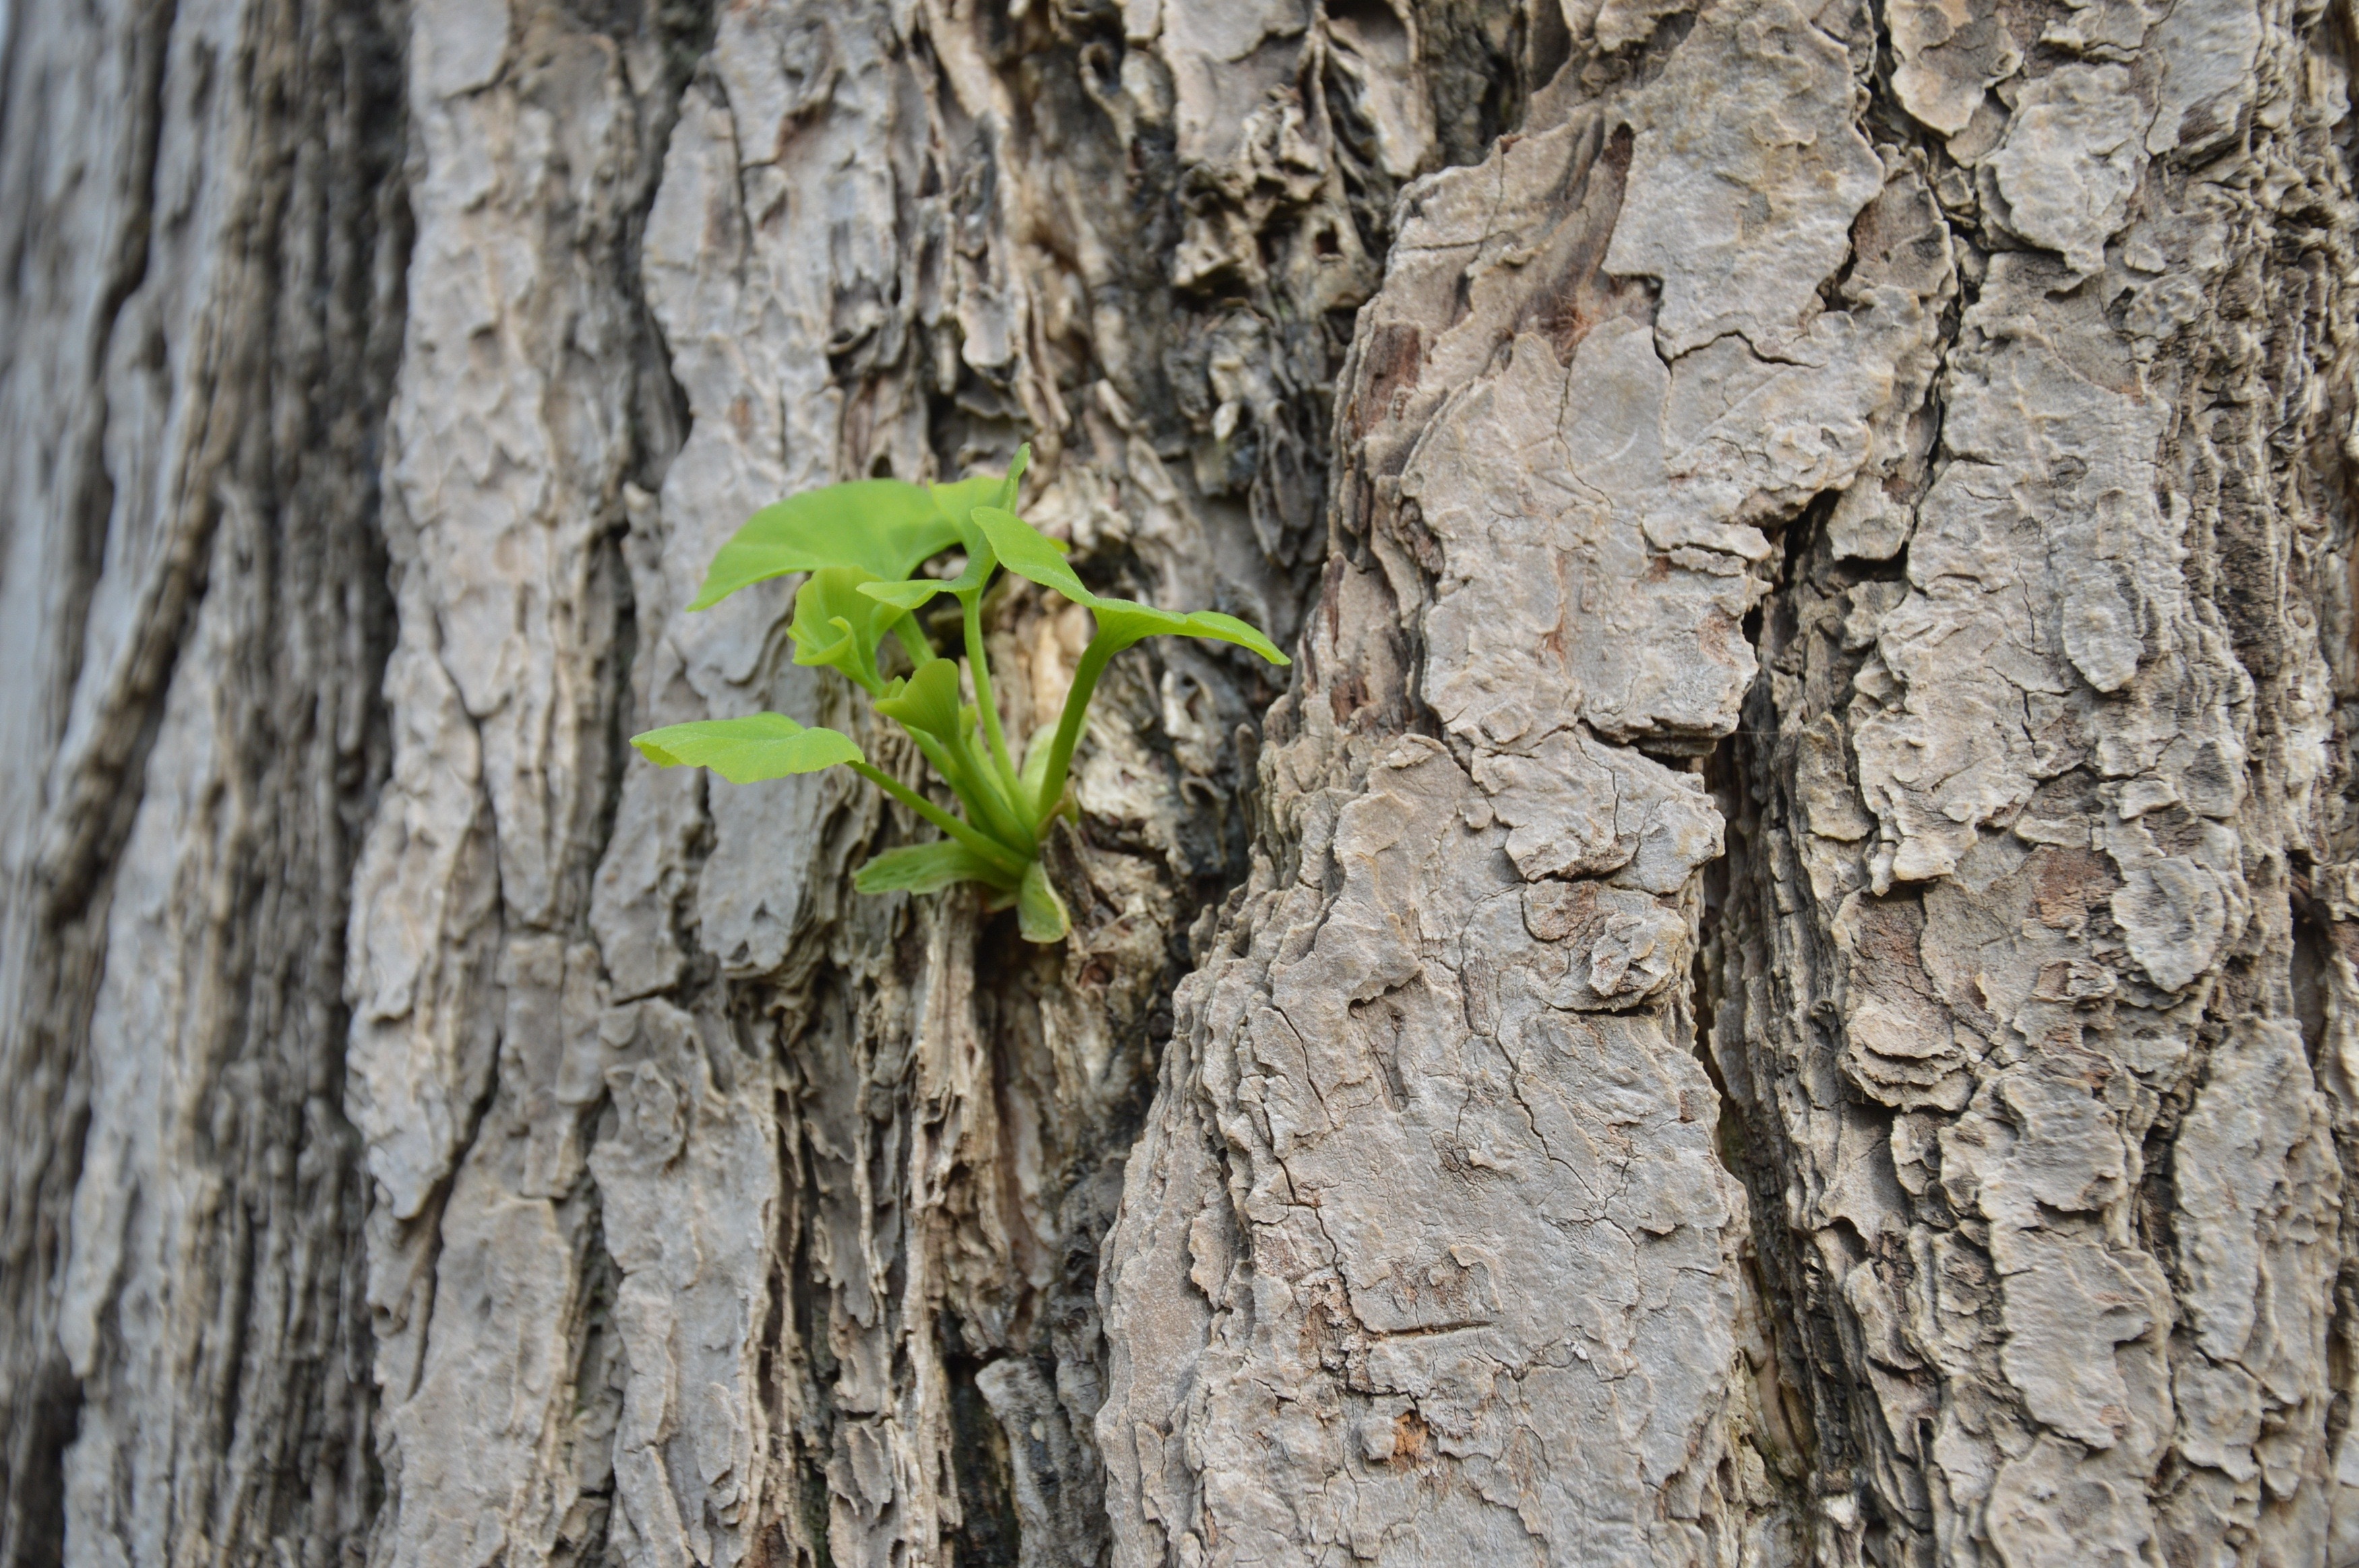 Tree, Gingko, Bark, Buds, New Leaves, tree trunk, textured